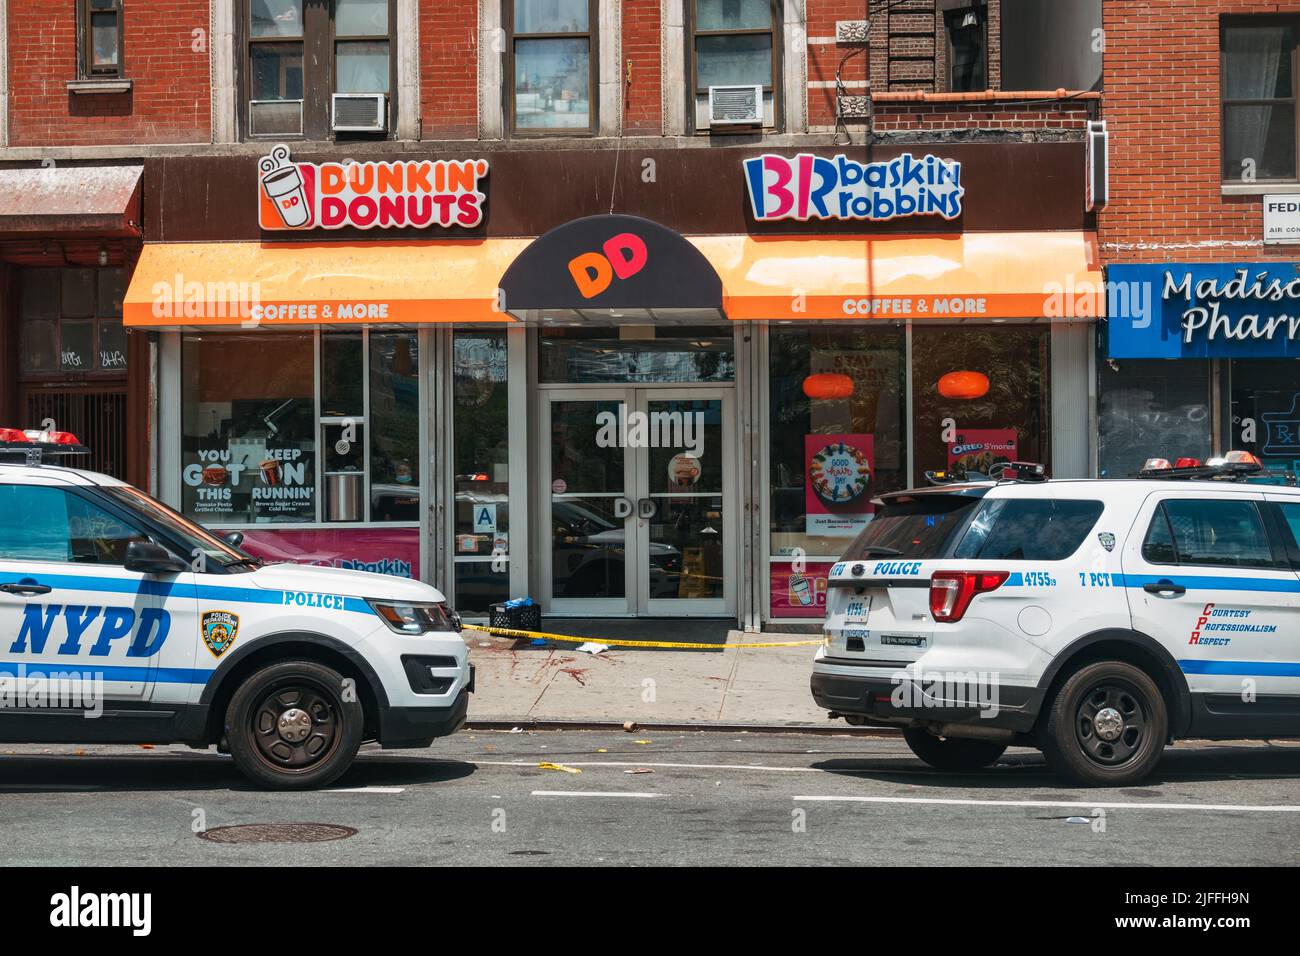 July 2, 2022: a crime scene in front of a Dunkin' Donuts in Manhattan's Lower East Side, New York City, after a man was shot in broad daylight Stock Photo